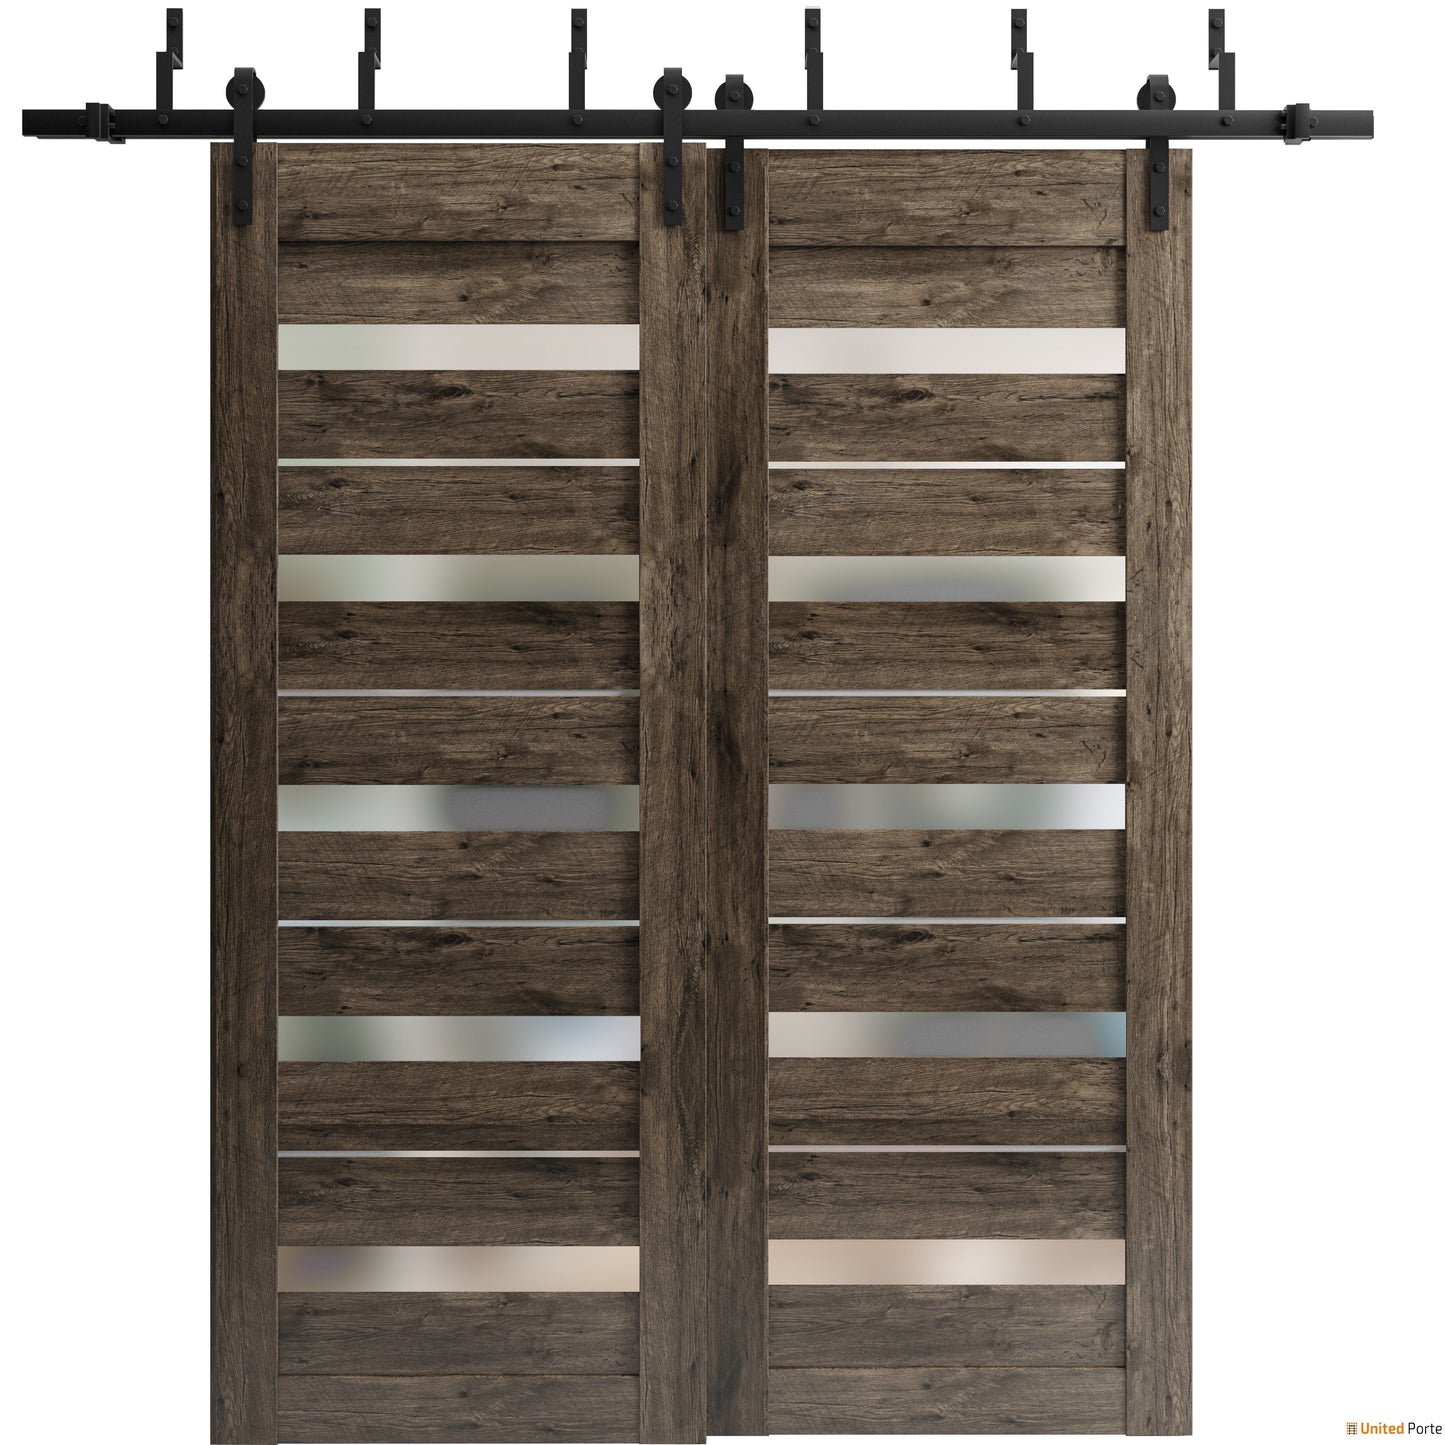 Quadro 4445 Cognac Oak Double Barn Door with Frosted Glass and Black Bypass Rail